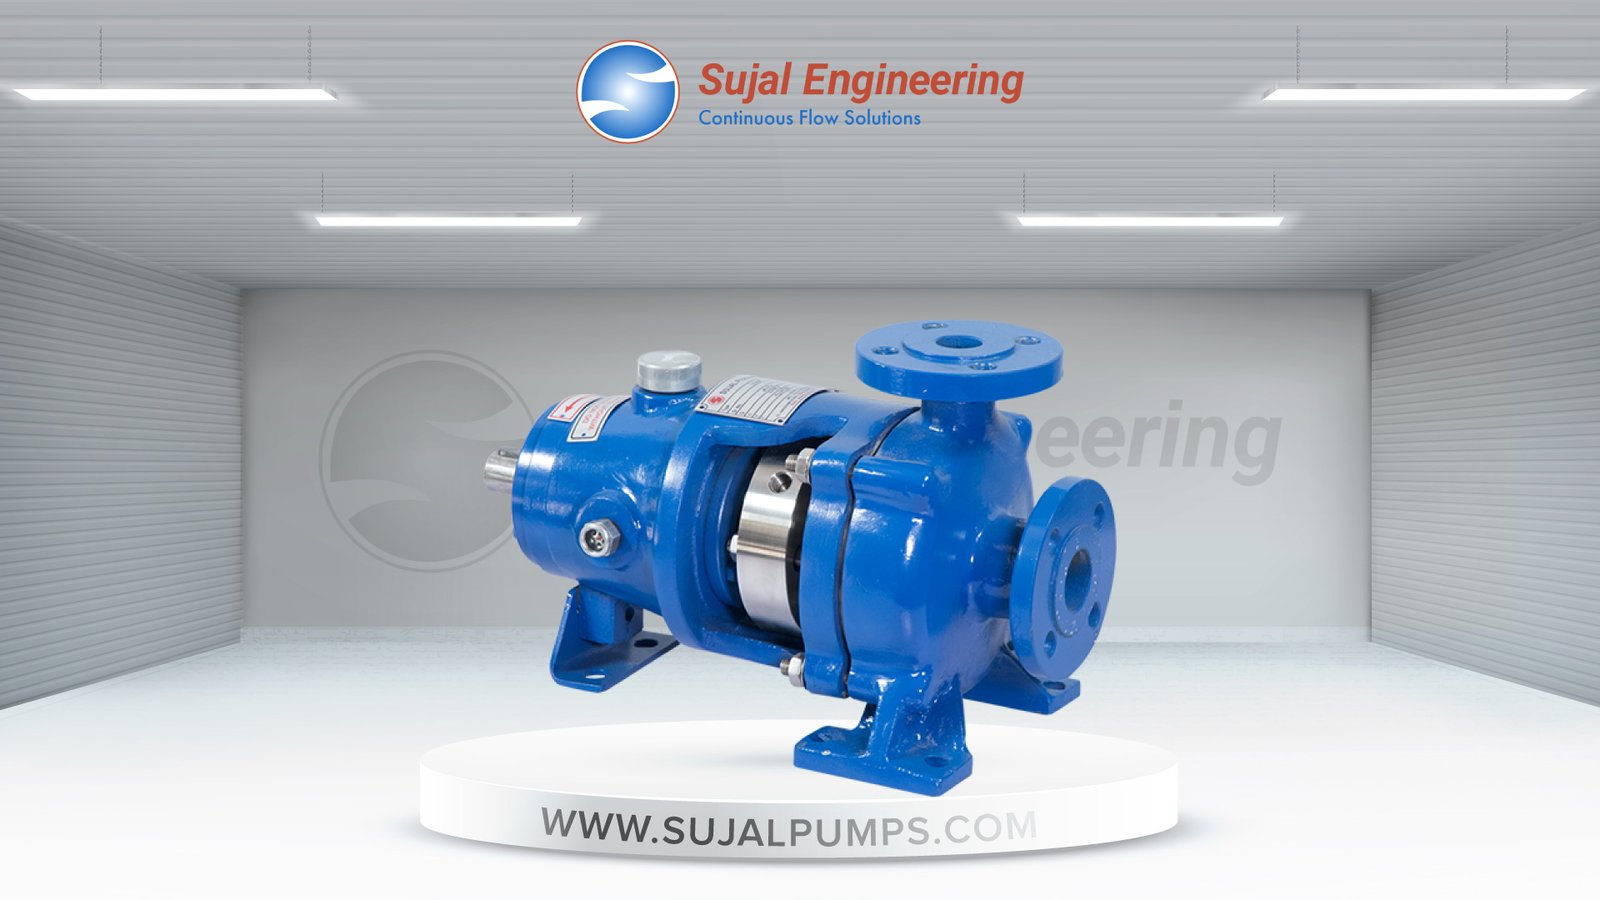 Sujal New Chemical Pumps 2022